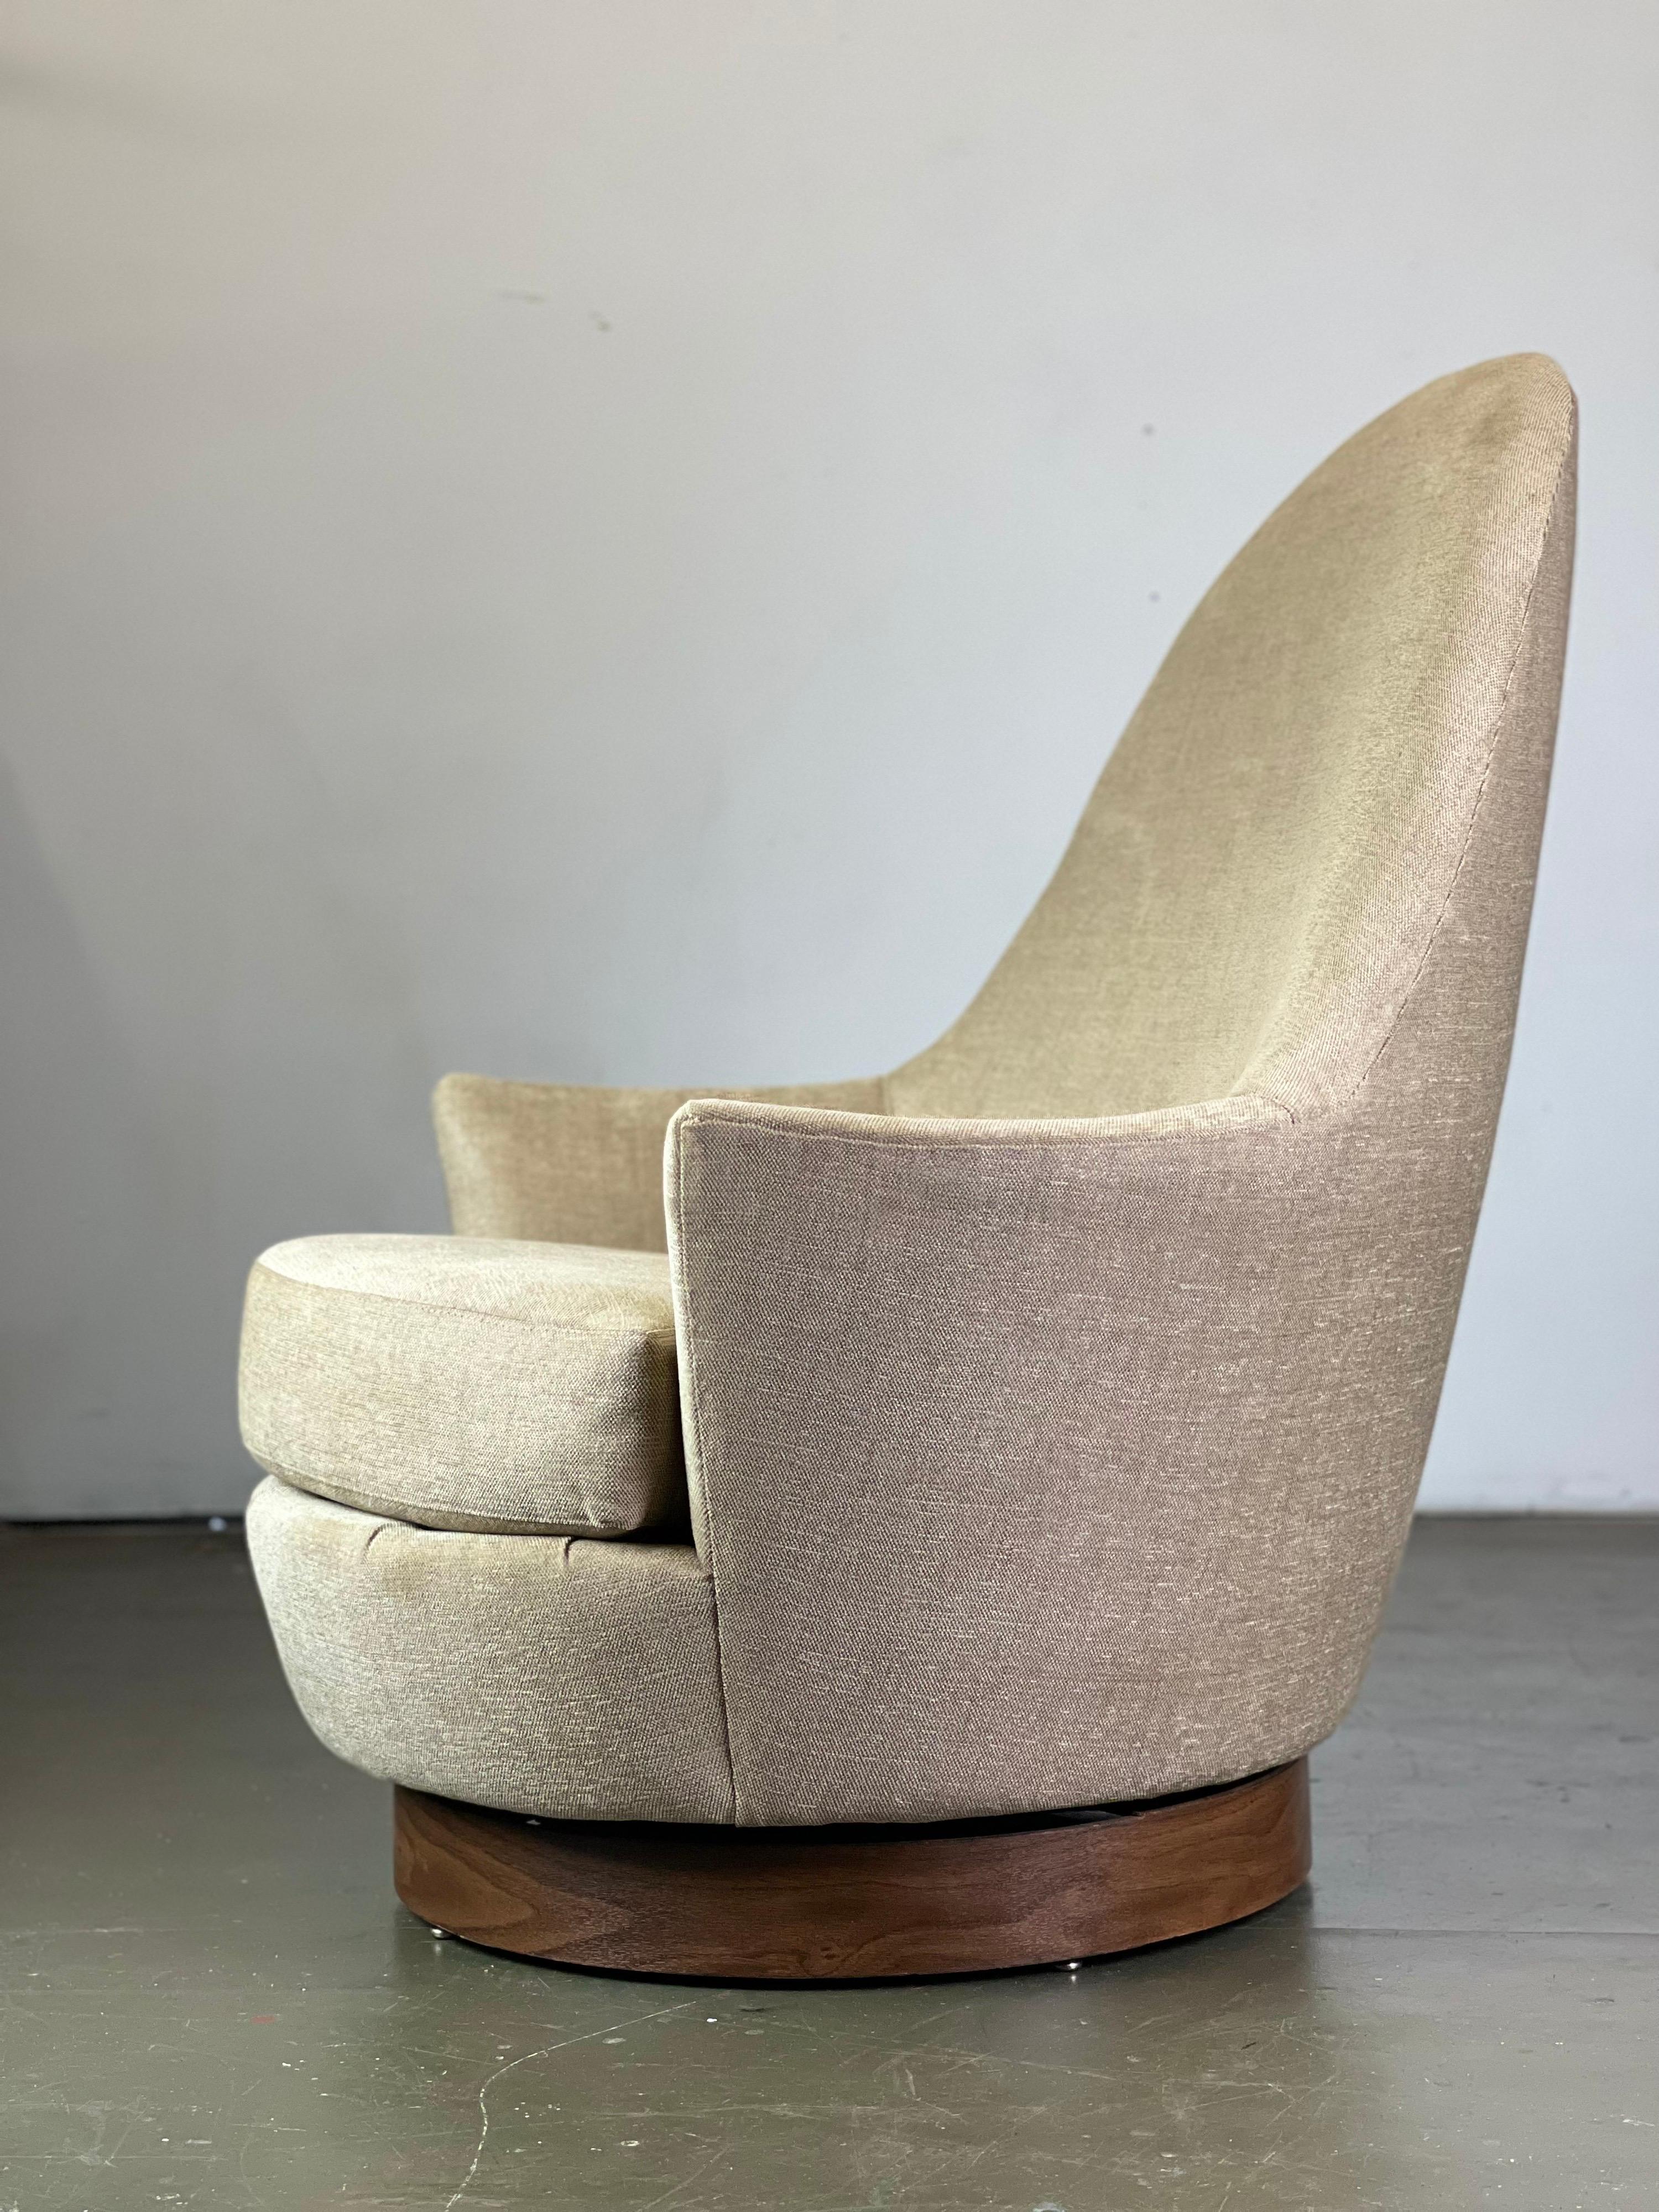 Lovely 1960's swivel lounge chair after Milo Baughman by Selig. The chair swivels back and forth - with a stopping point that allows it to swivel almost 360 degrees. 
Reupholstered in a durable soft cream/tan tiny check fabric. Photos show chair